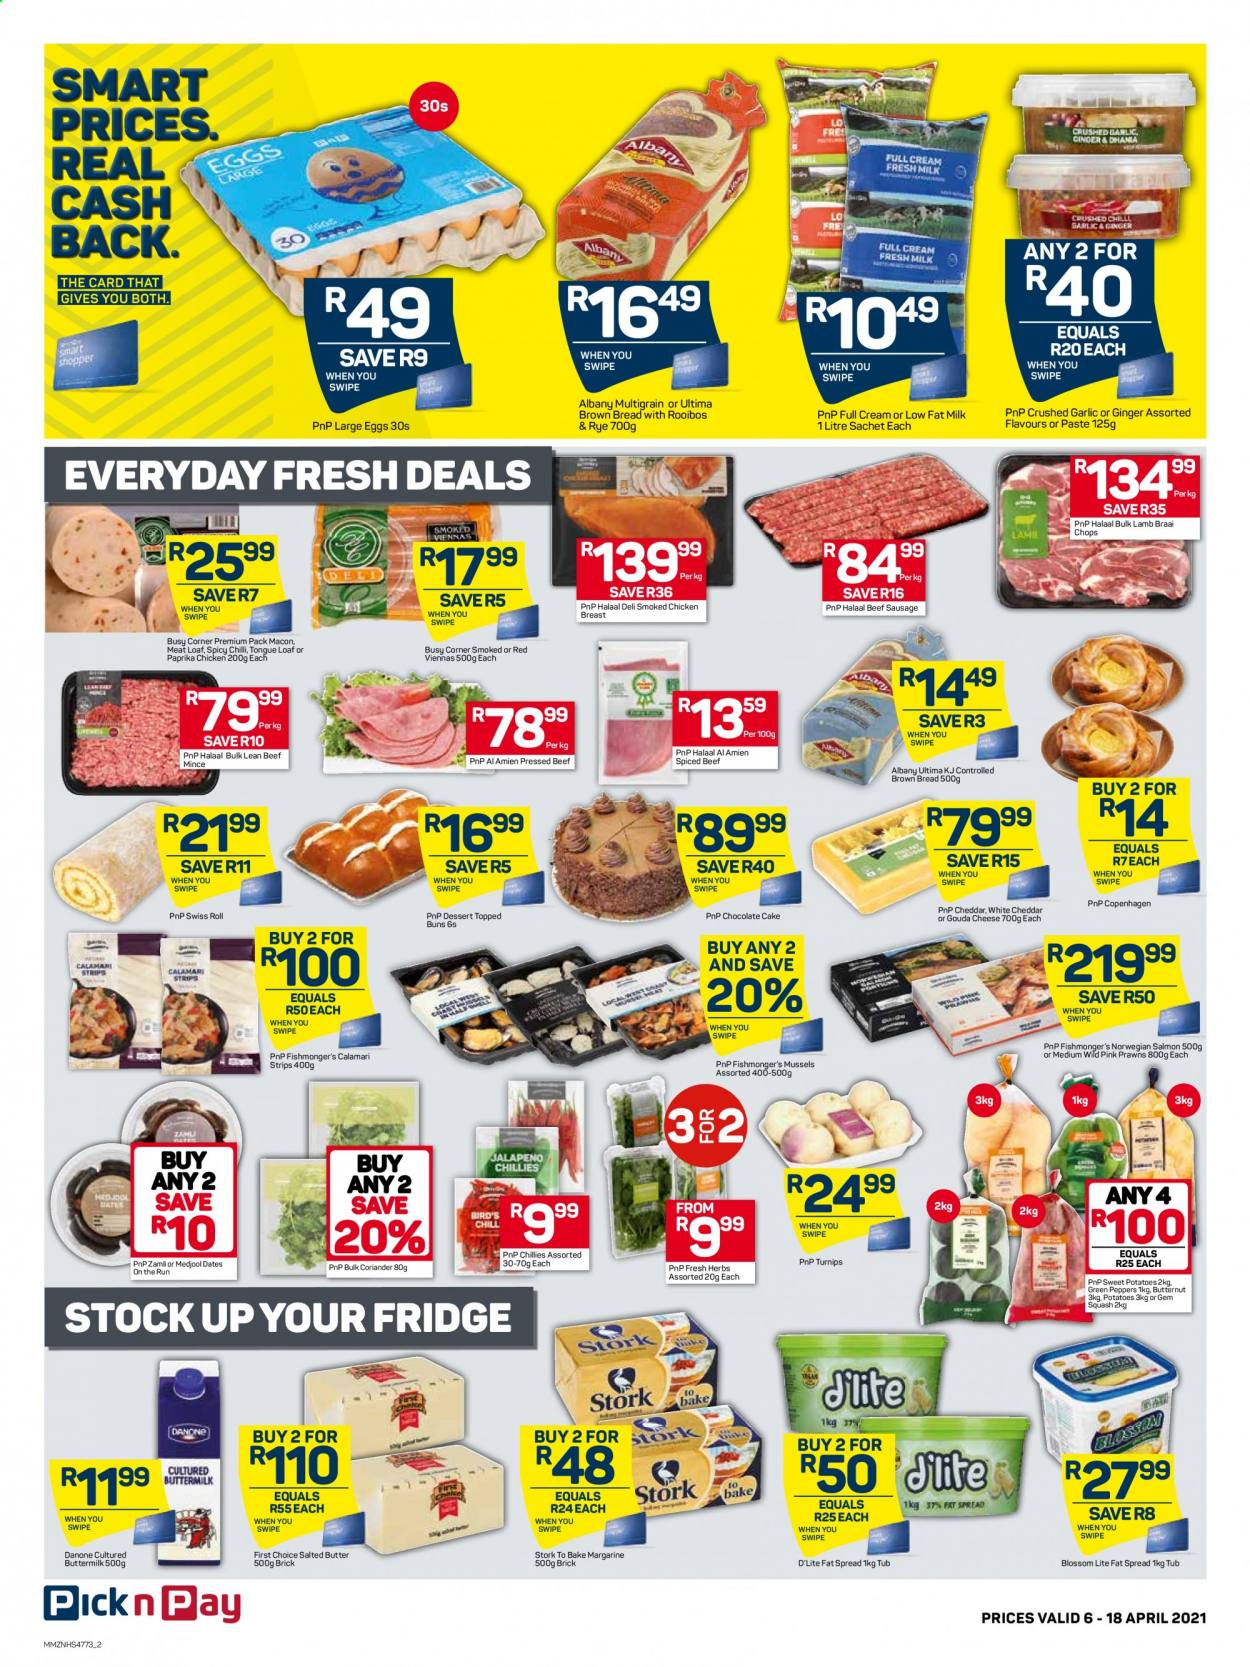 Pick n Pay specials - 04.06.2021 - 04.18.2021. 